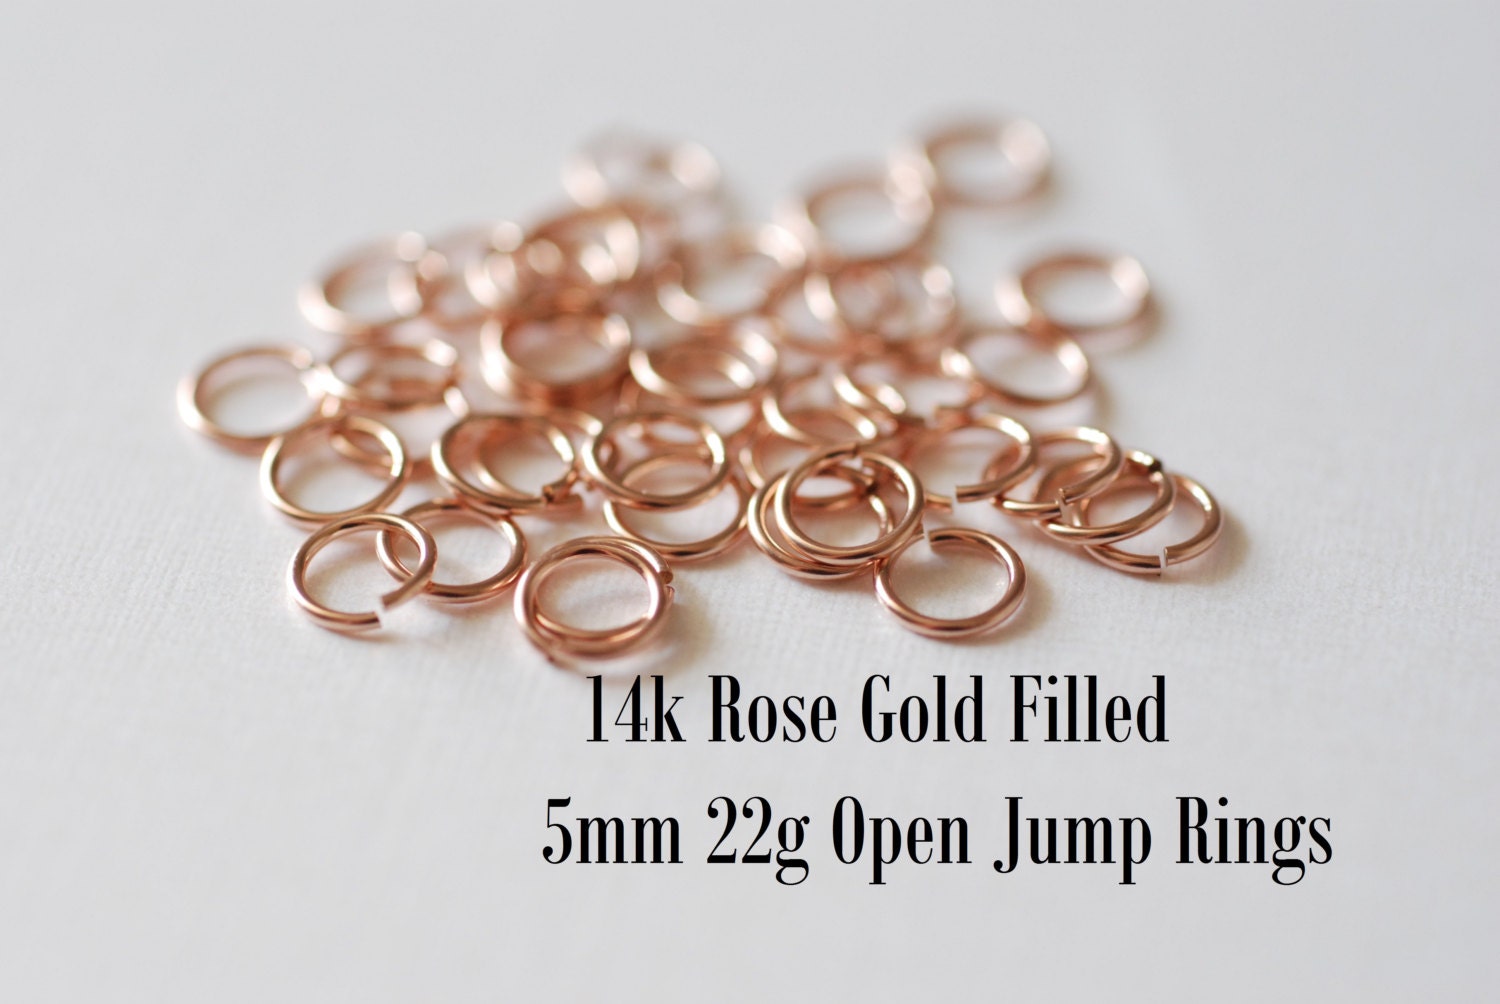 25 Pieces 14k Rose Gold Filled Open Jump Rings 5mm Jump